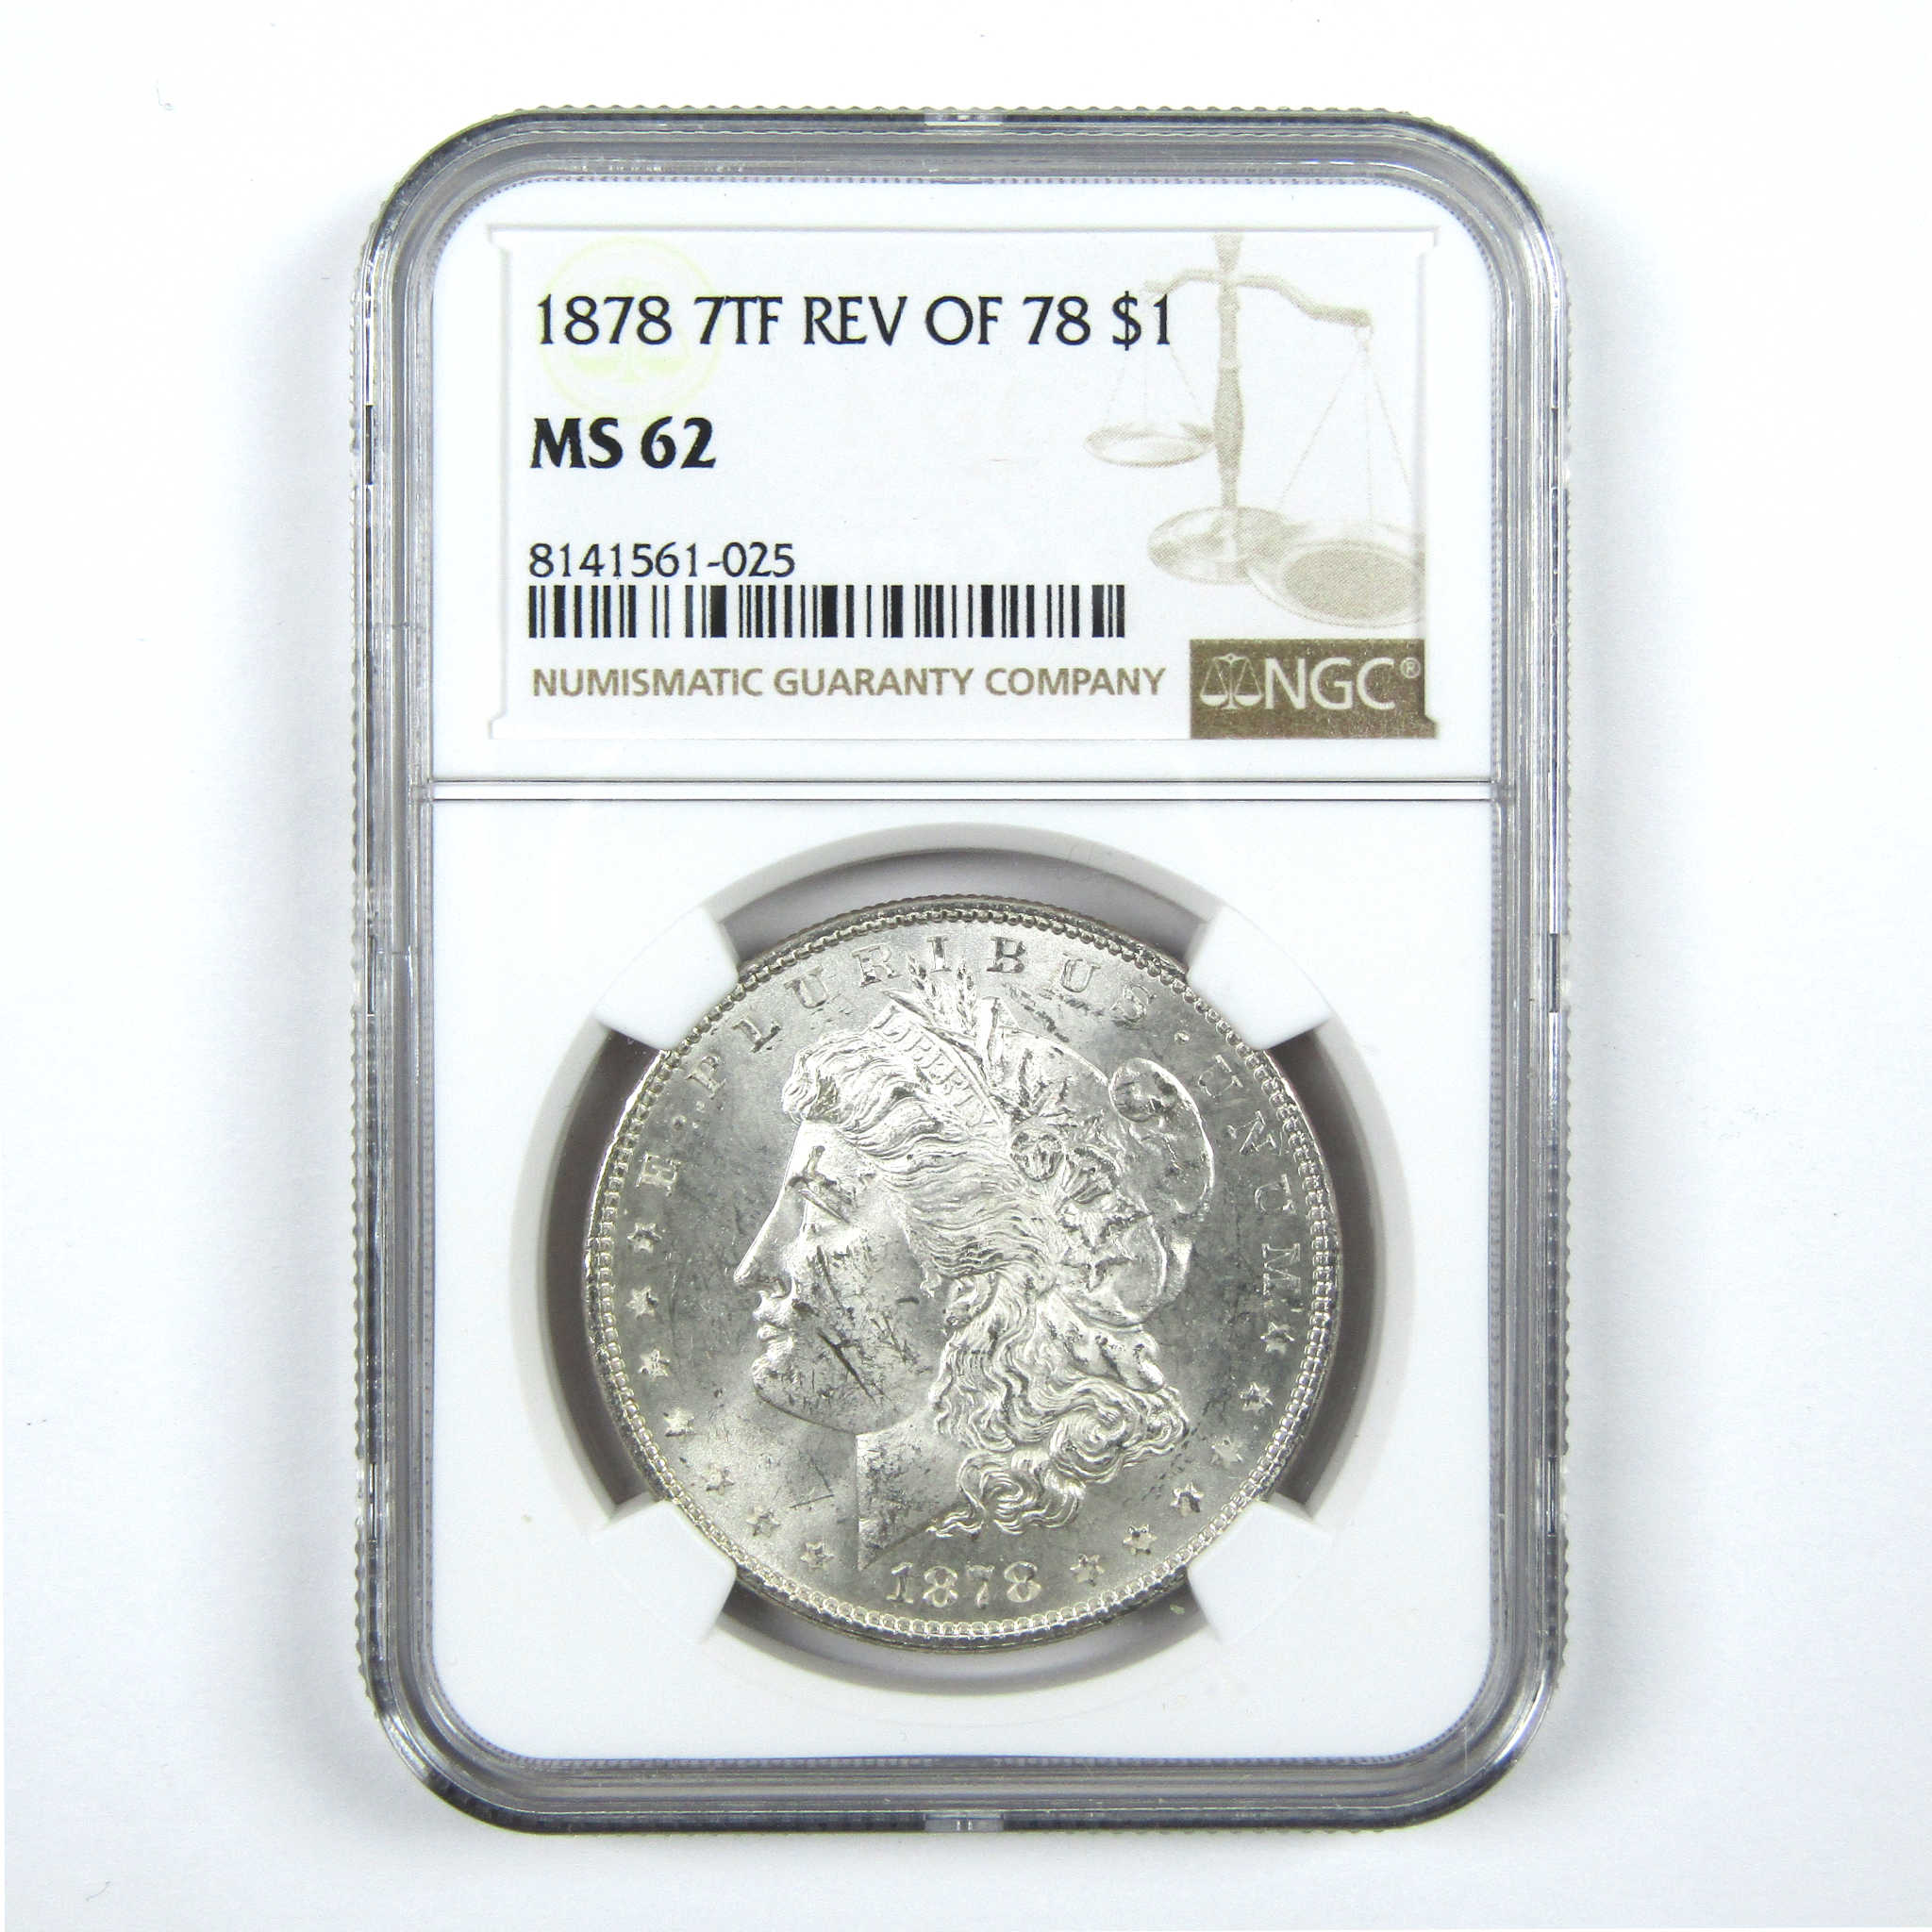 1878 7TF Rev 78 Morgan Dollar MS 62 NGC Uncirculated SKU:I14018 - Morgan coin - Morgan silver dollar - Morgan silver dollar for sale - Profile Coins &amp; Collectibles